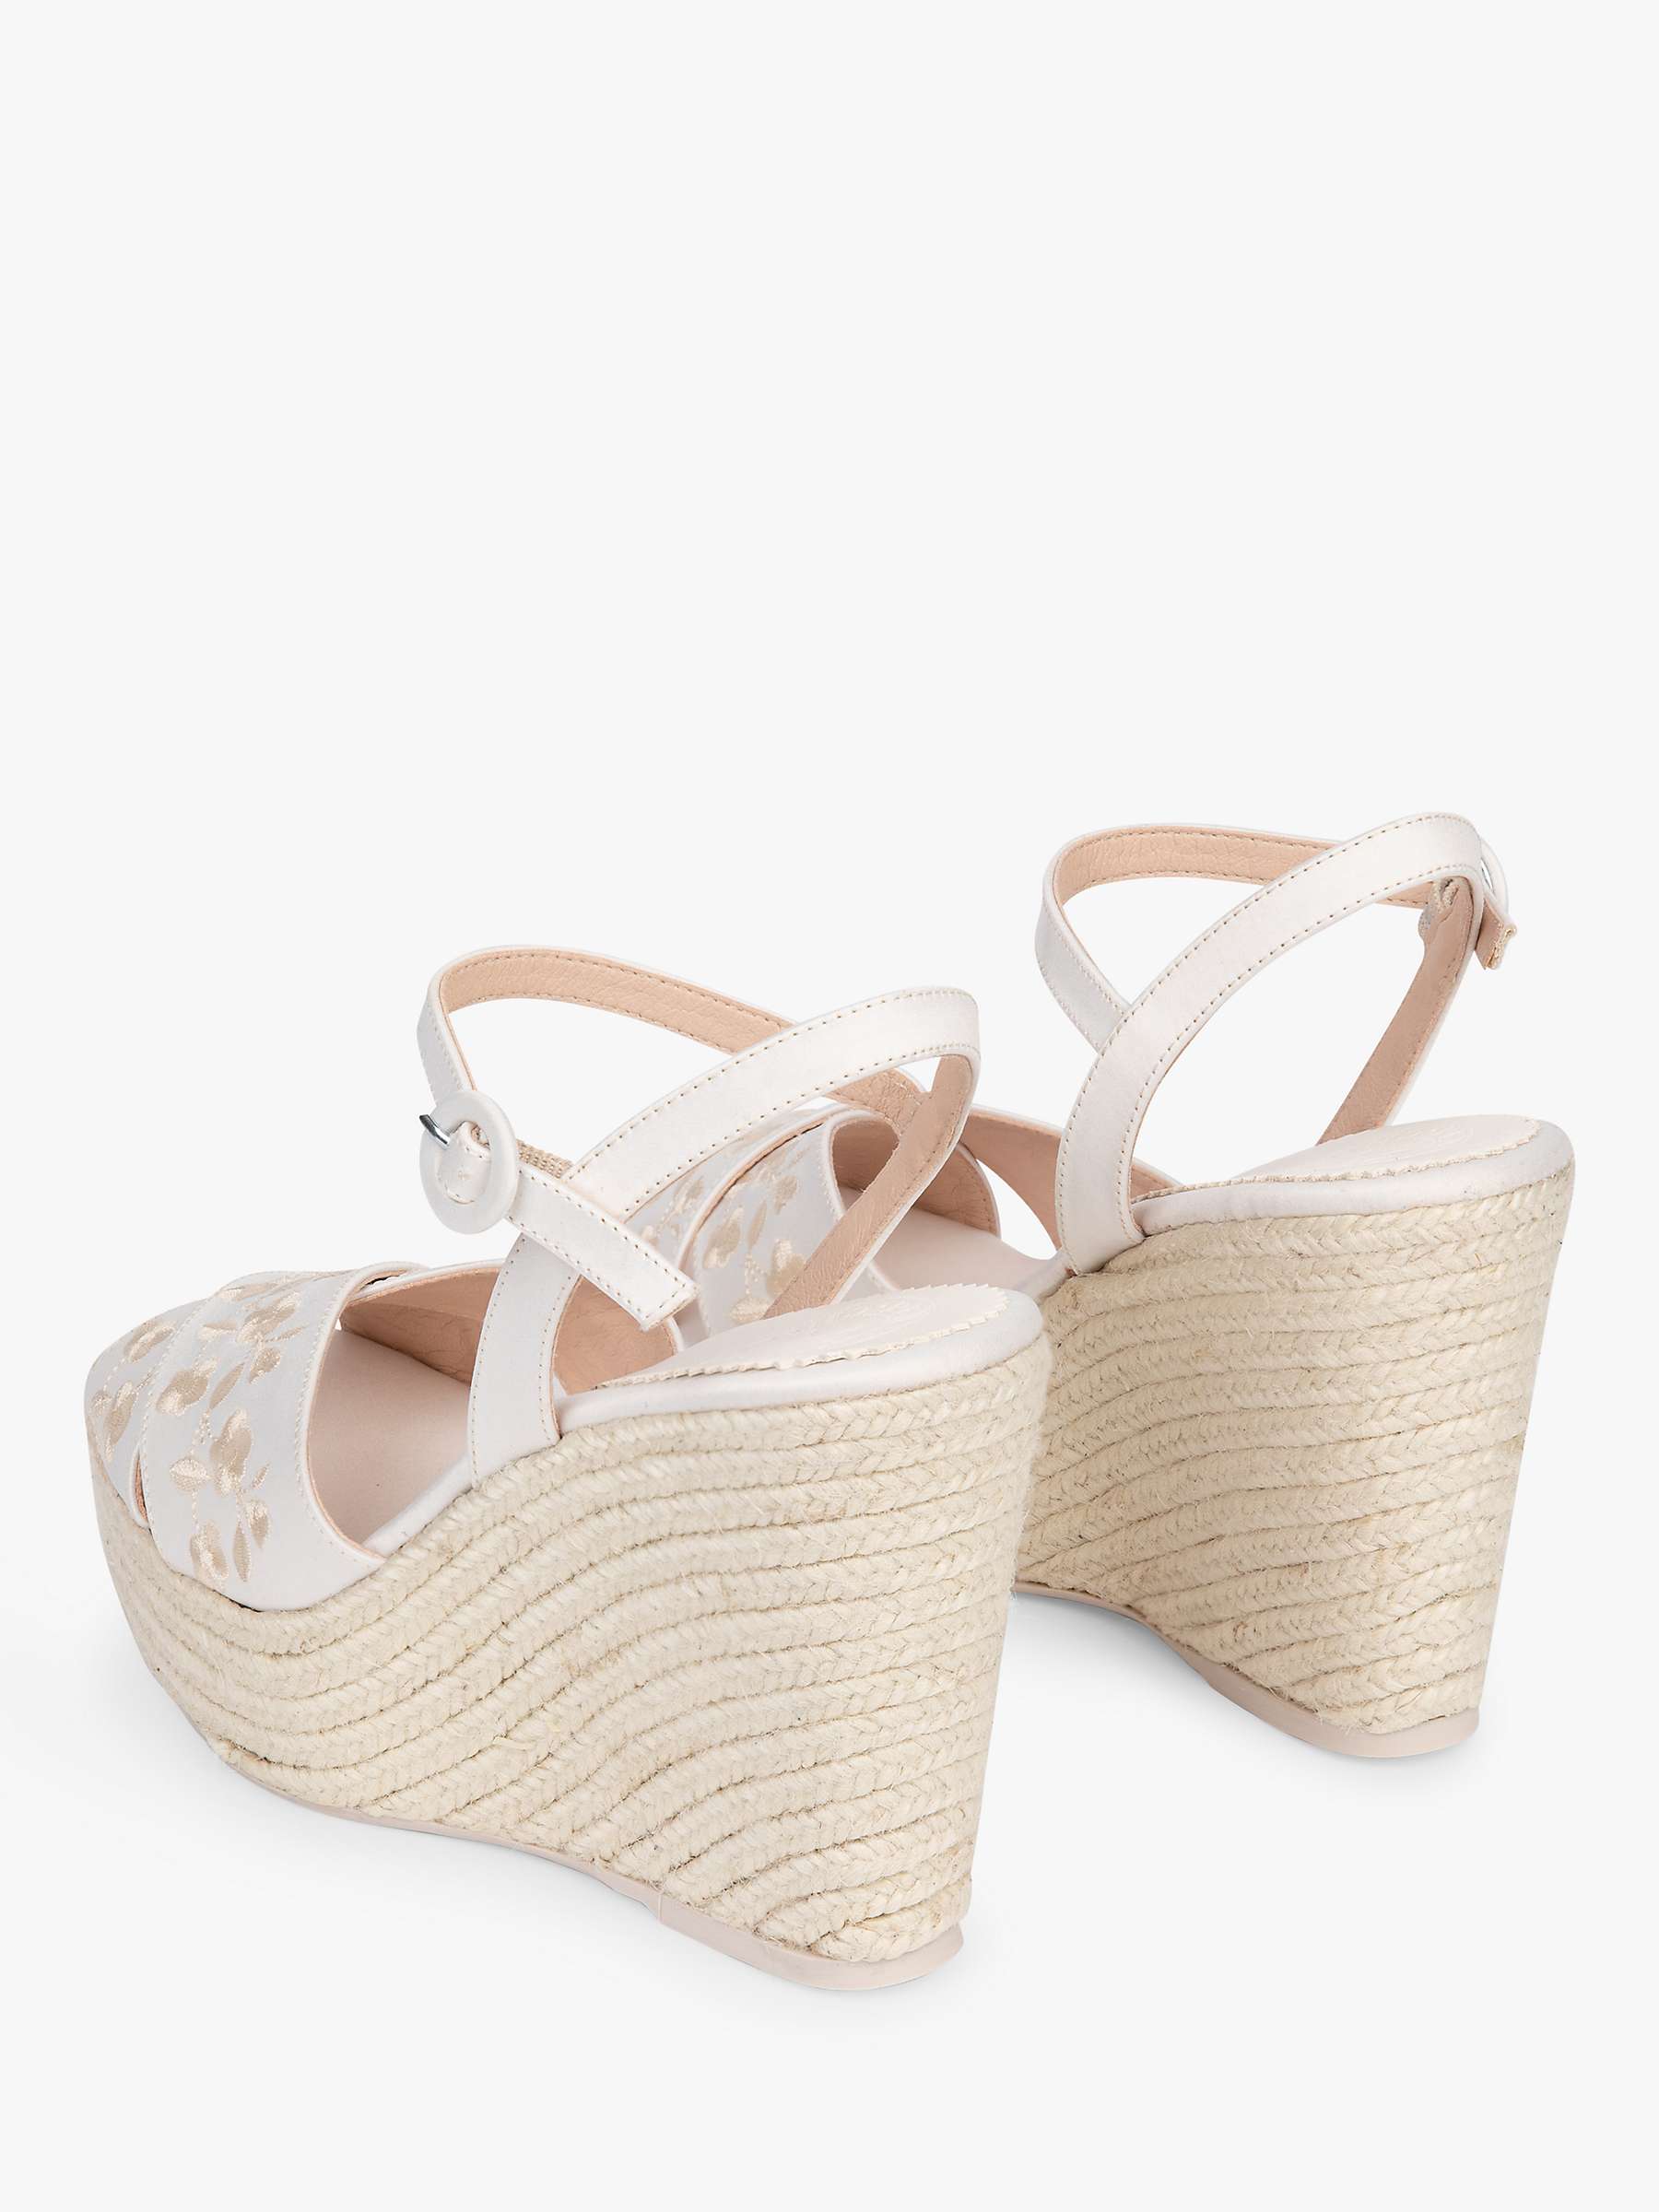 Buy Penelope Chilvers Santorini Embroidered Wedge Sandals, Ivory Online at johnlewis.com